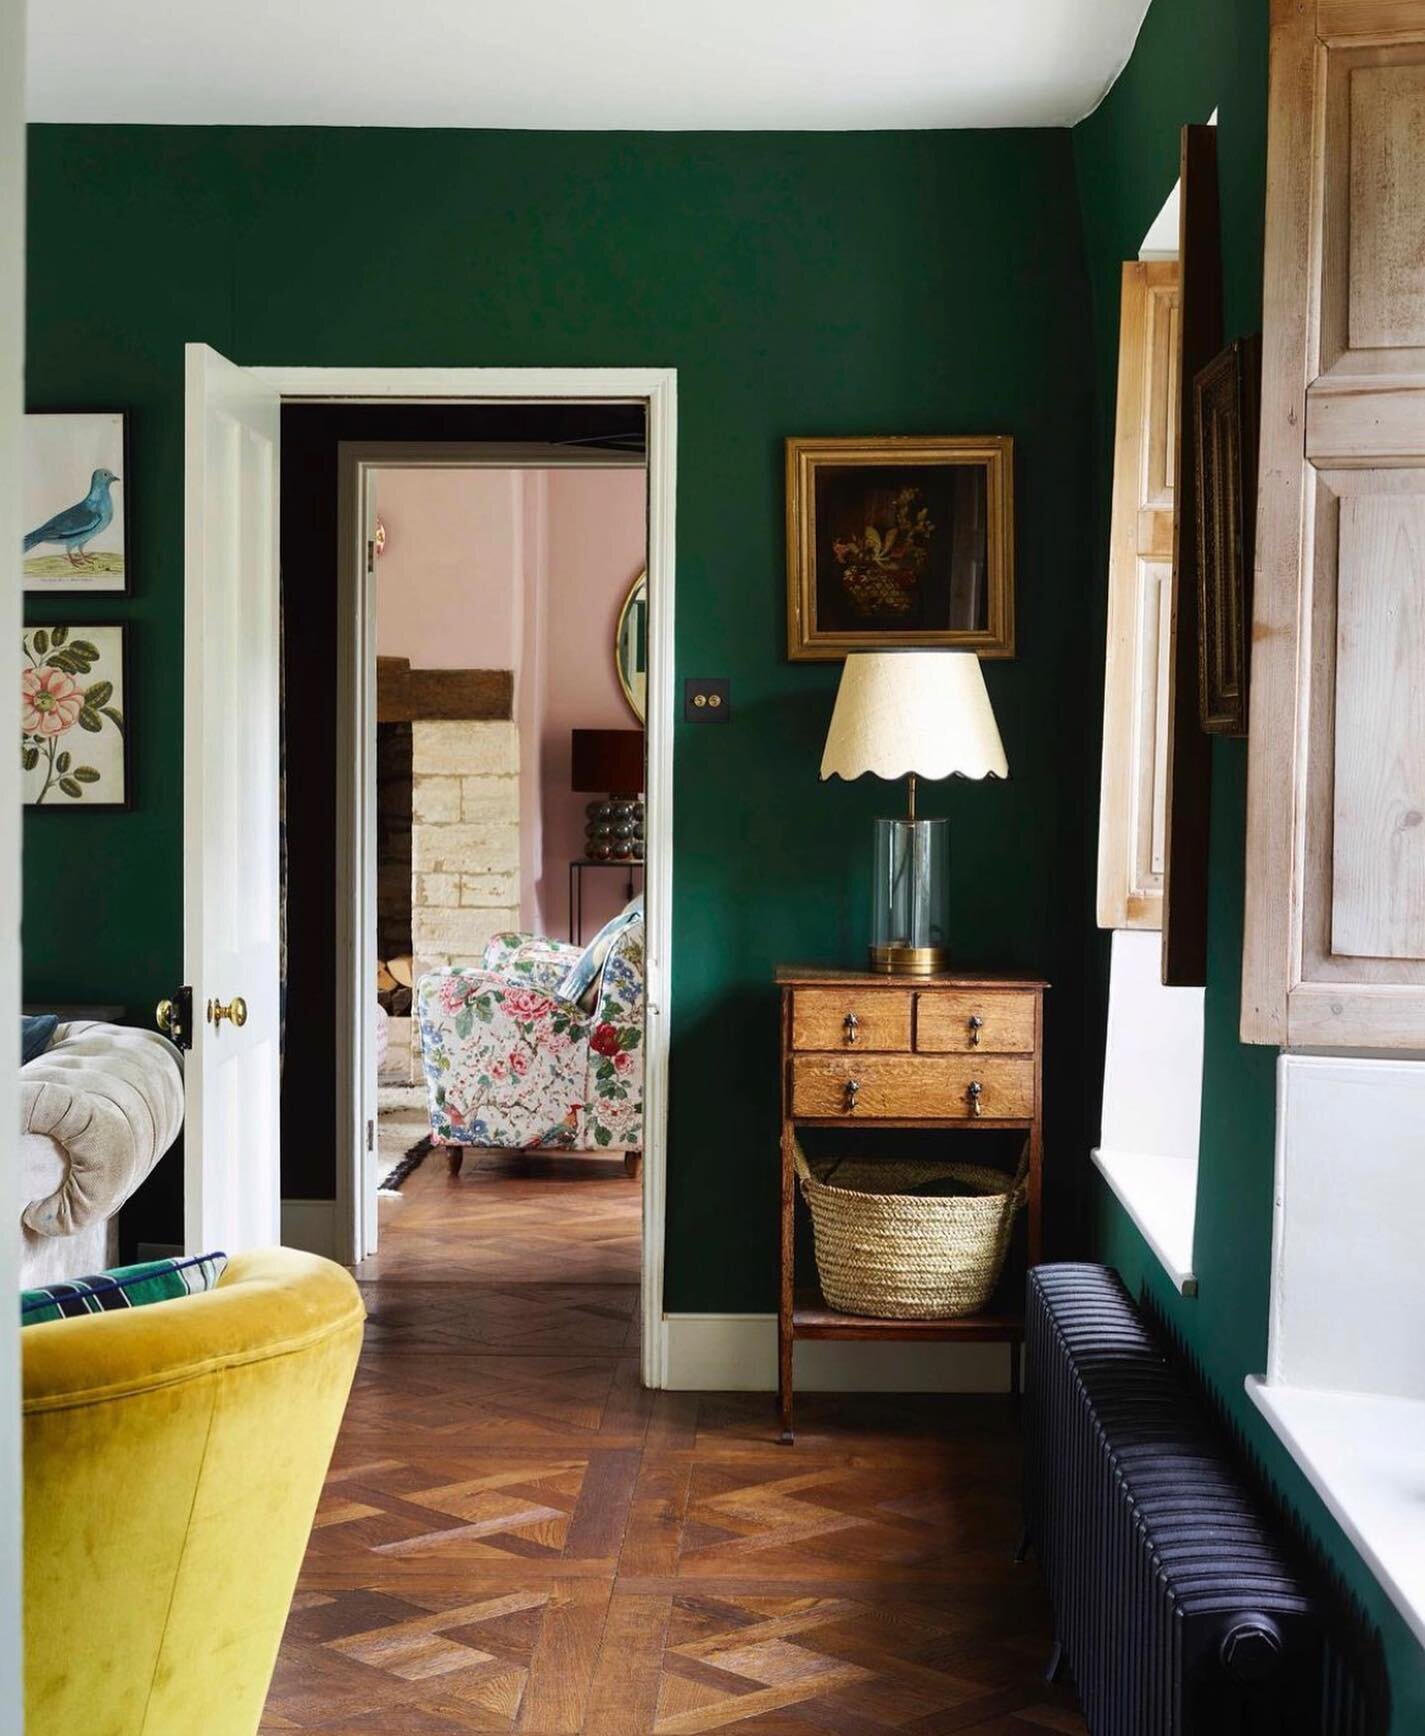 Hunter Dunn is green at its best. It&rsquo;s a brilliant backdrop for artwork and furniture. Perfectly shown here by @annabelgrimshawdesign 
.
Fun fact, Hunter Dunn is named after Joan Hunter Dunn, John Betjeman&rsquo;s muse. 
.
Are you looking to ma